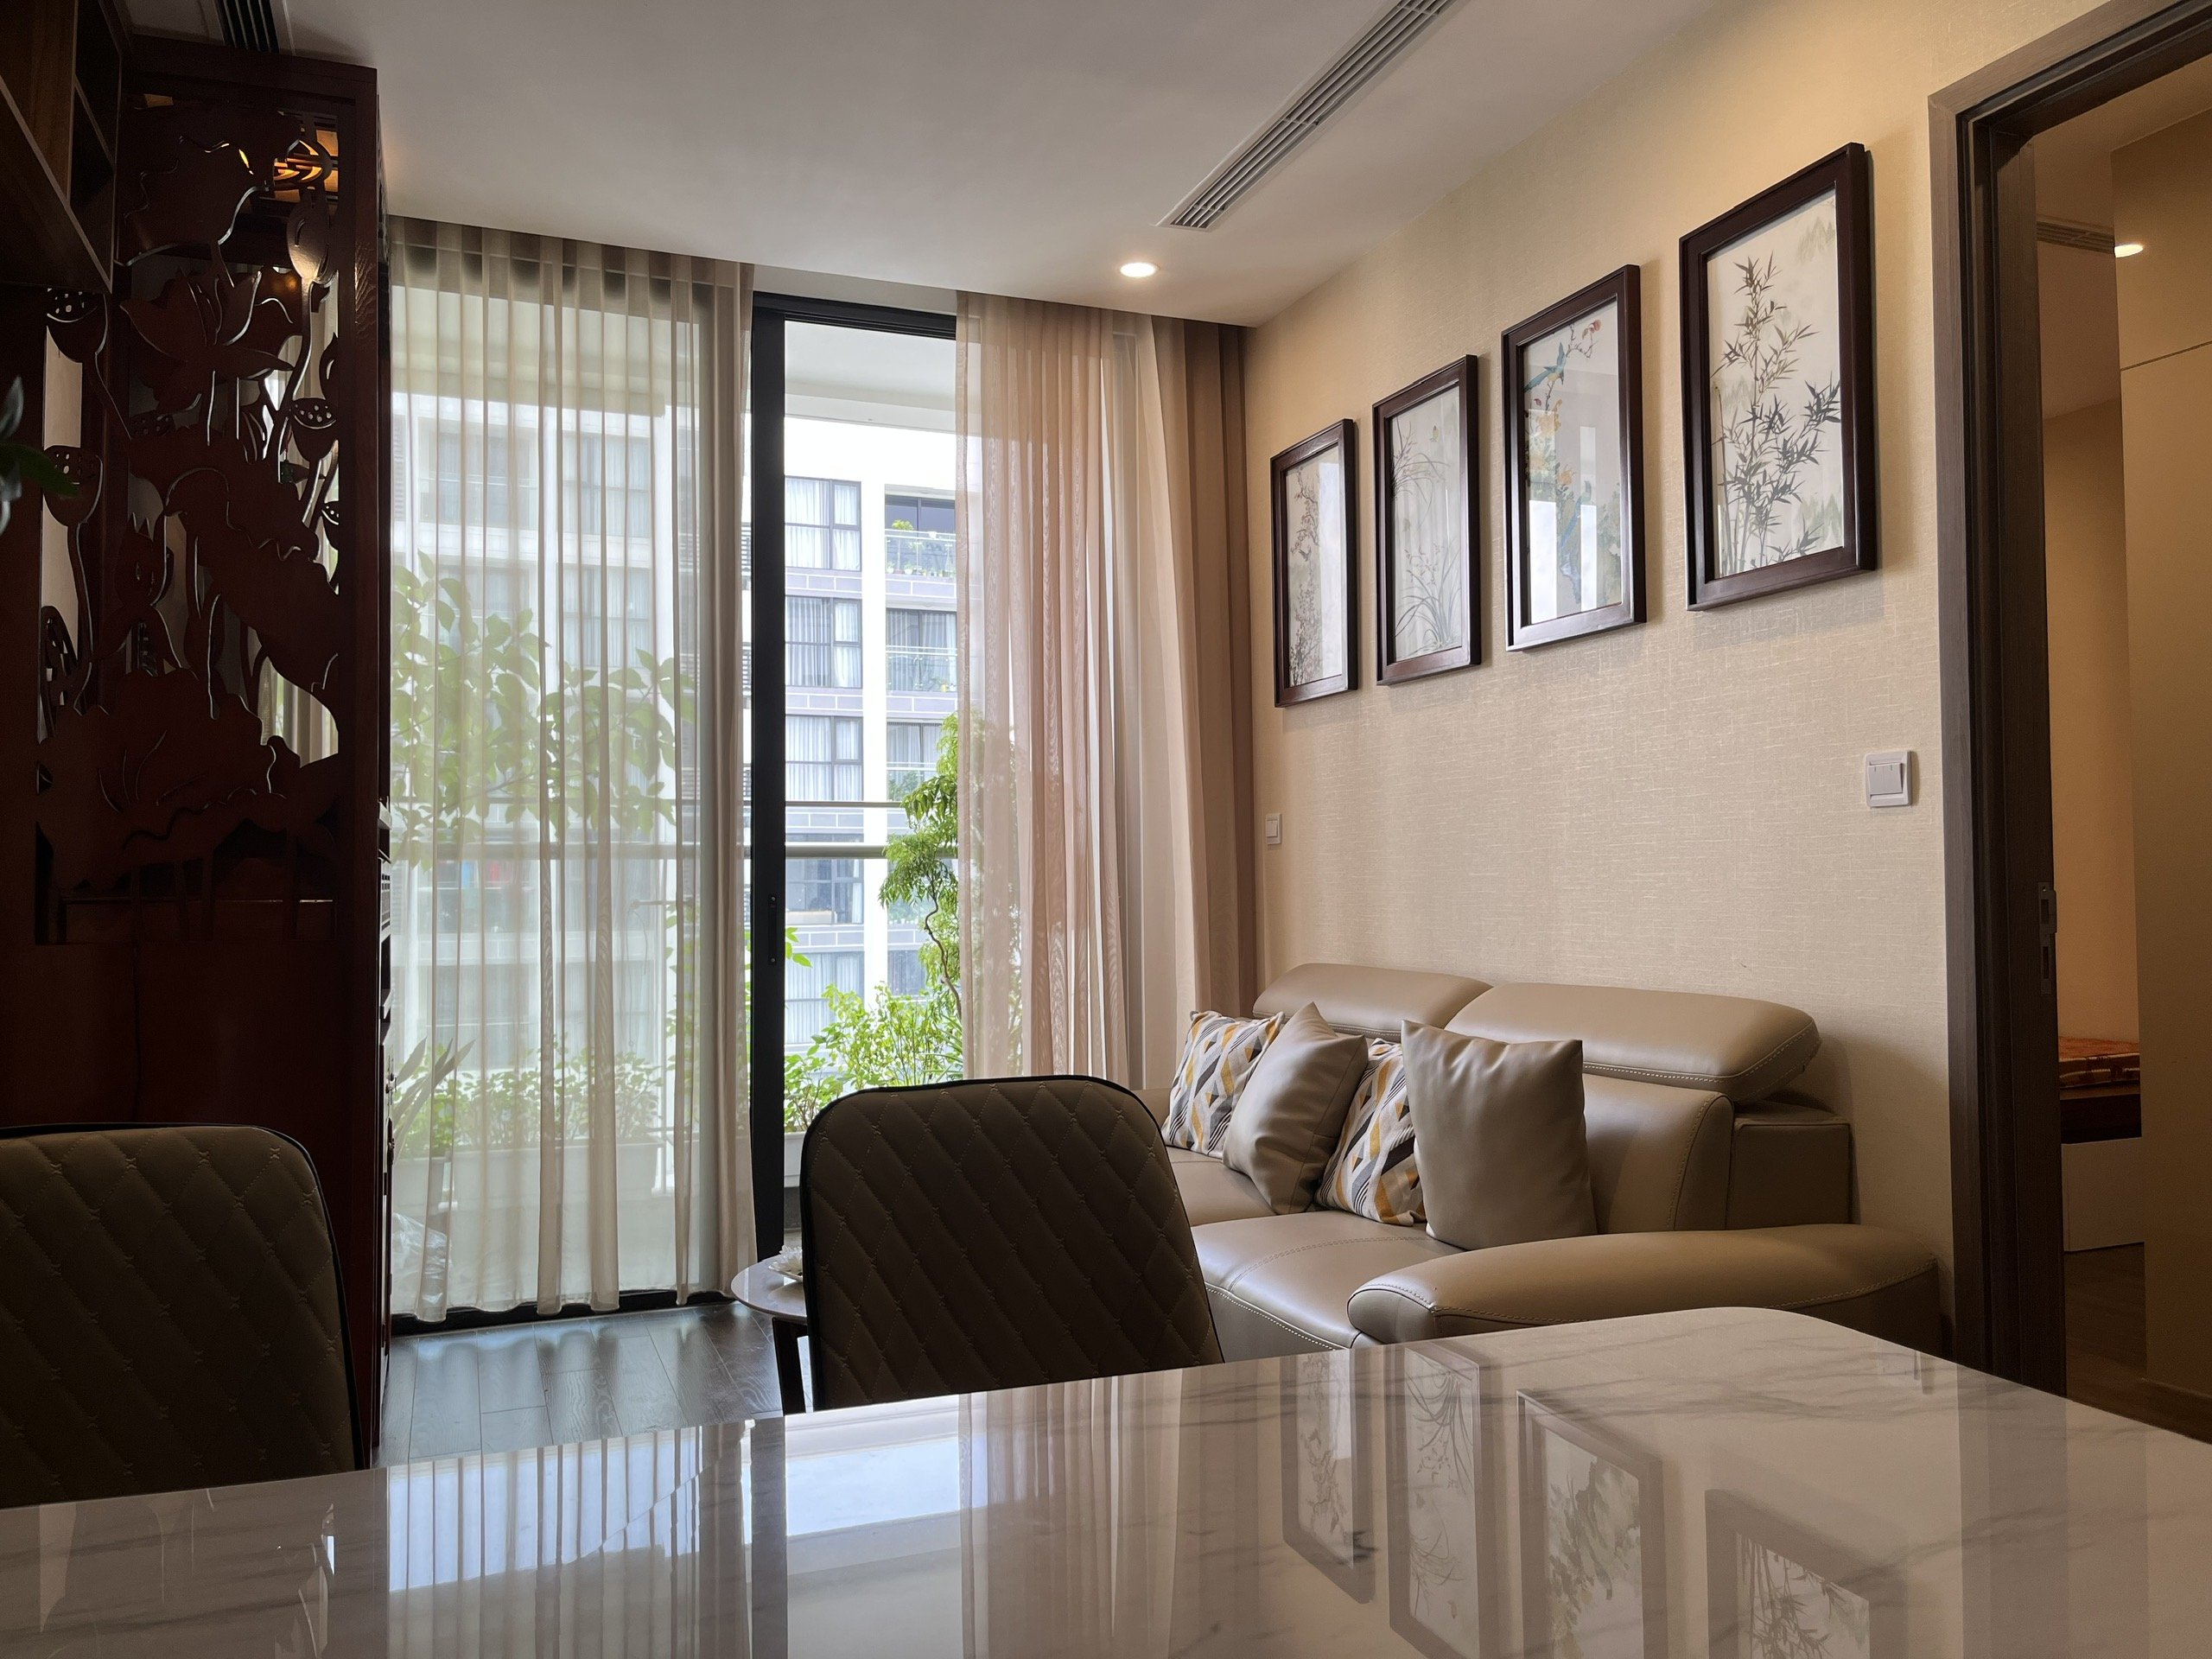 2 Bedroom Apartment for rent with full furniture of S6B building at Vinhomes Symphony 3